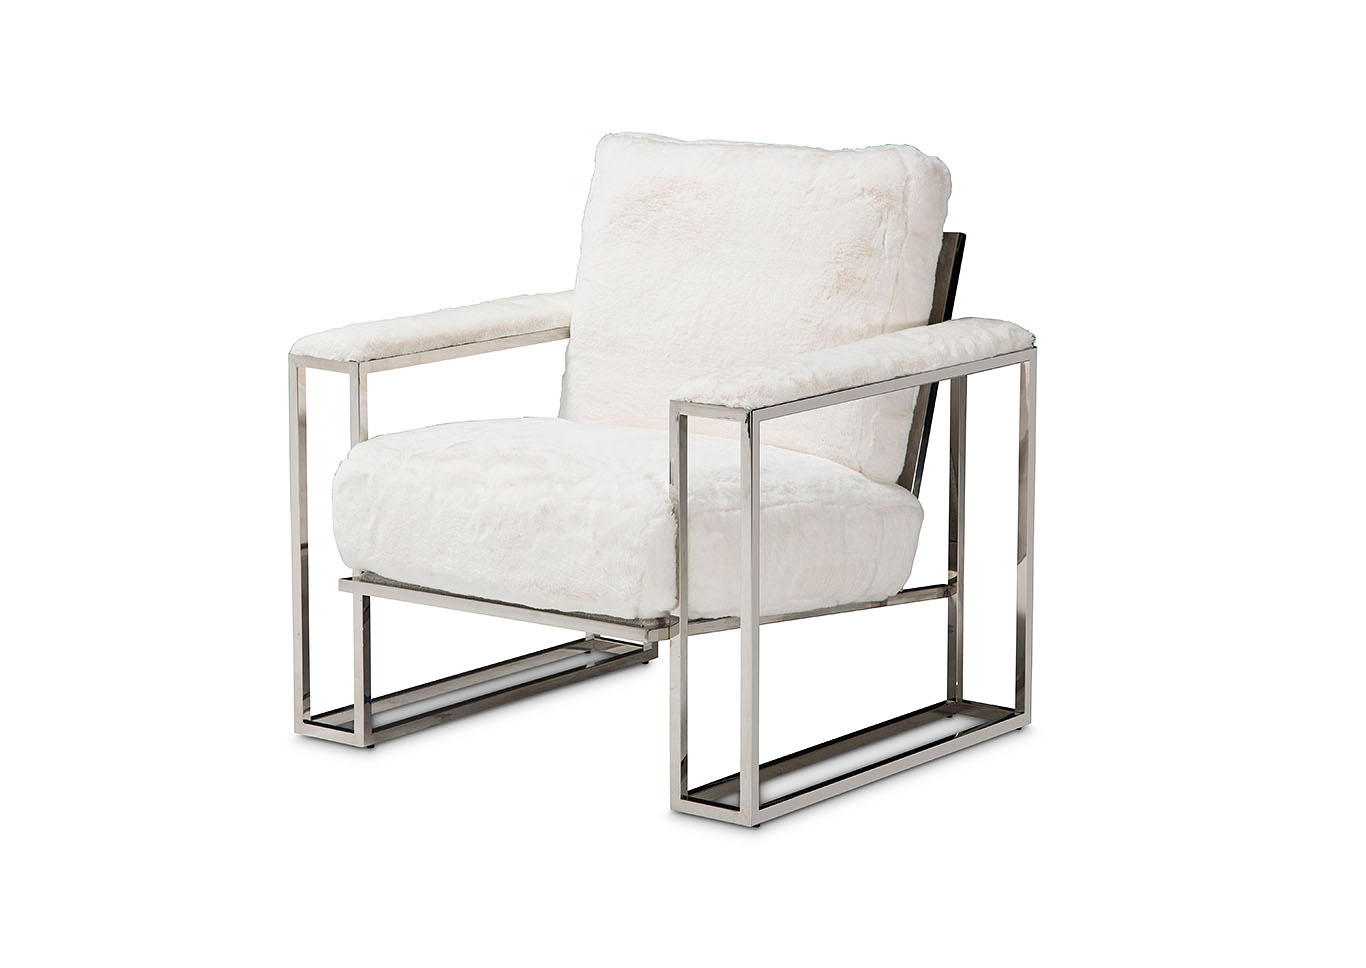 Astro Faux Fur Chair StainlessSteel,AICO